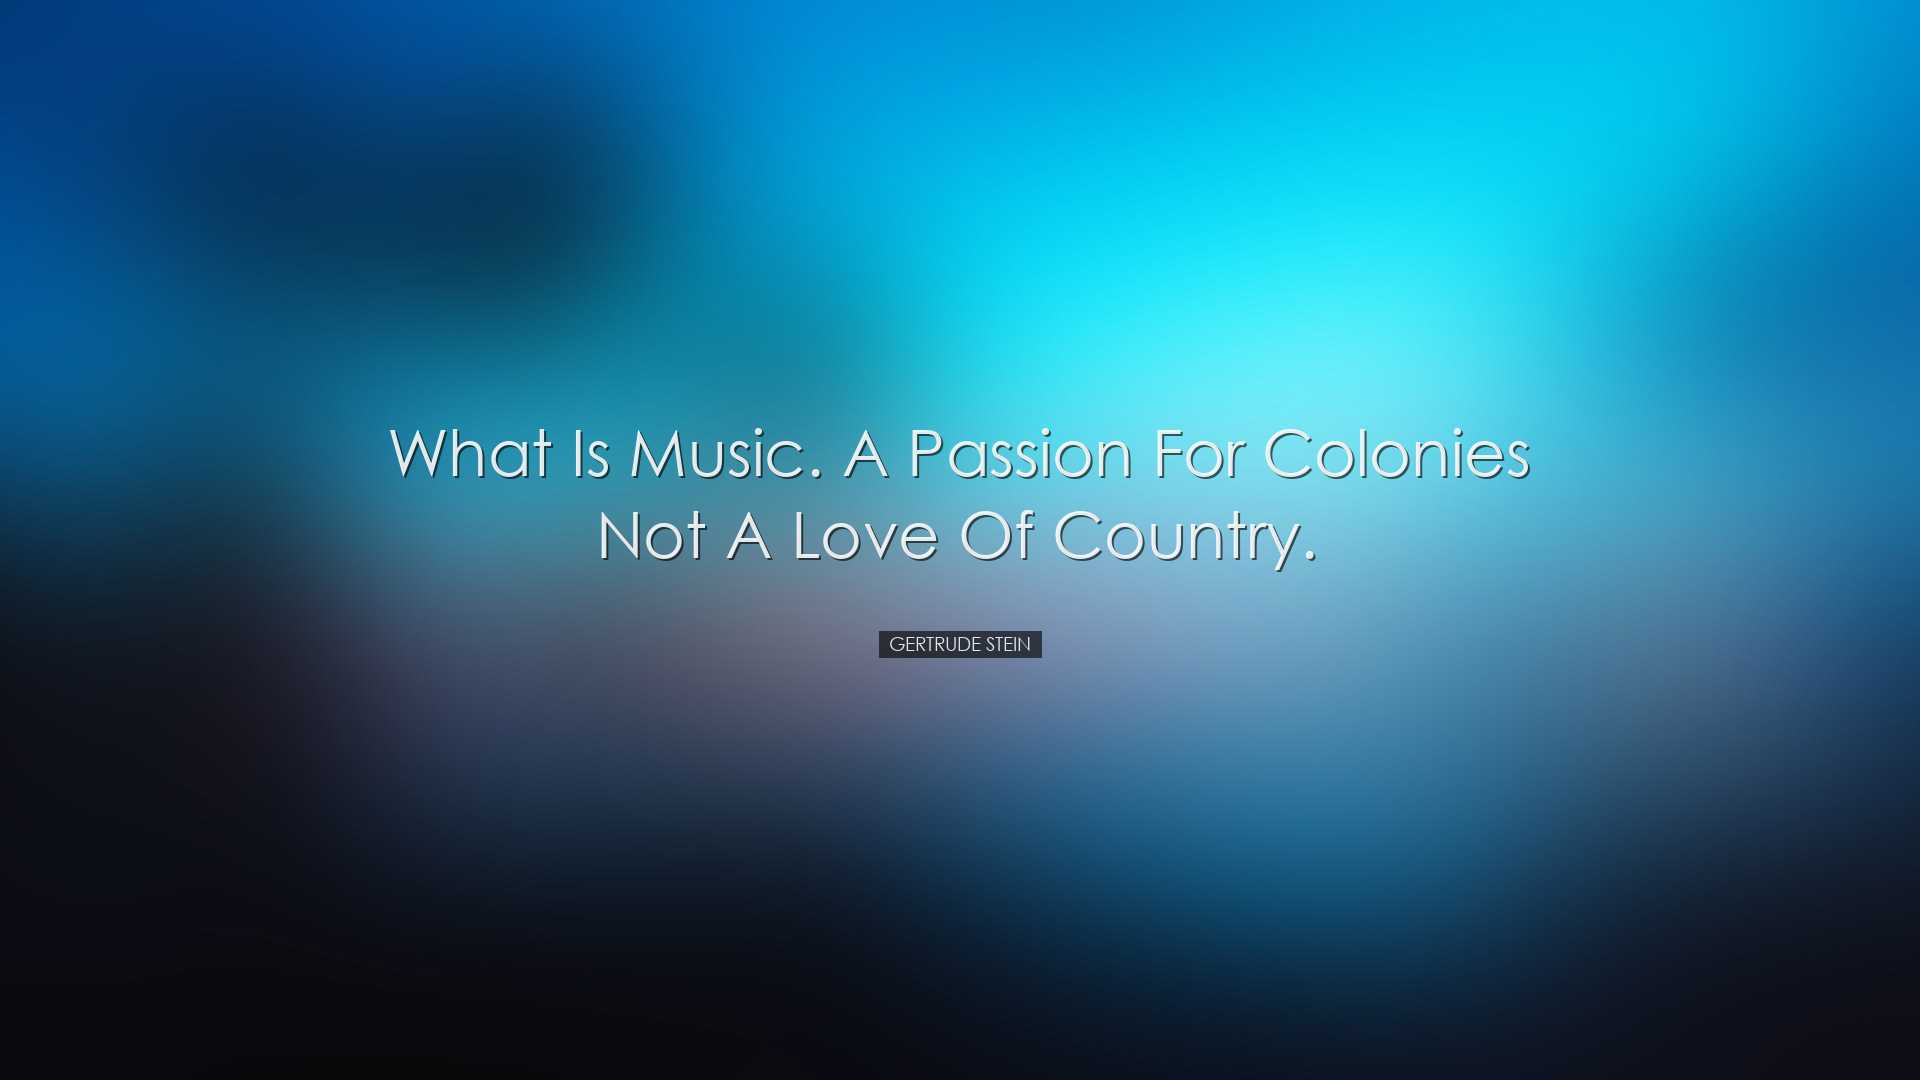 What is music. A passion for colonies not a love of country. - Ger